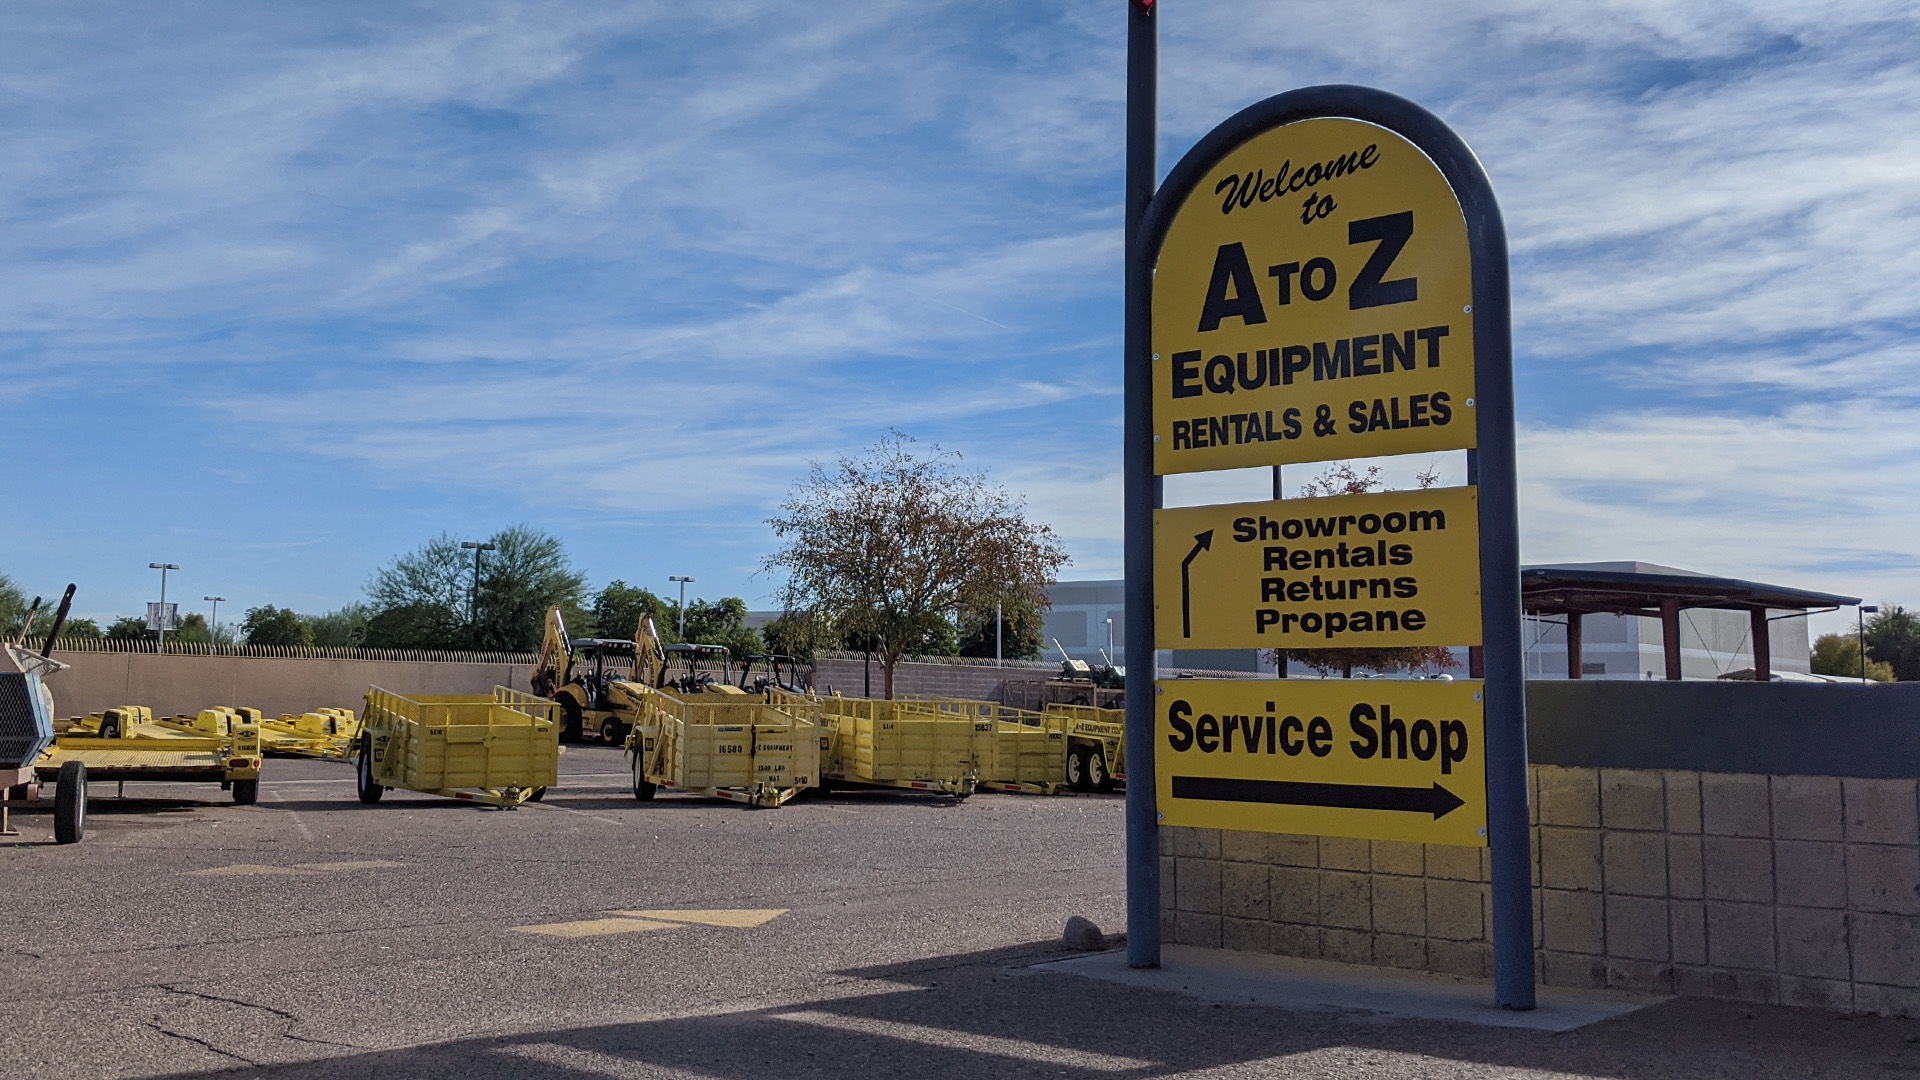 The sign outside A to Z Equipment Rentals & Sales in Gilbert, Arizona.